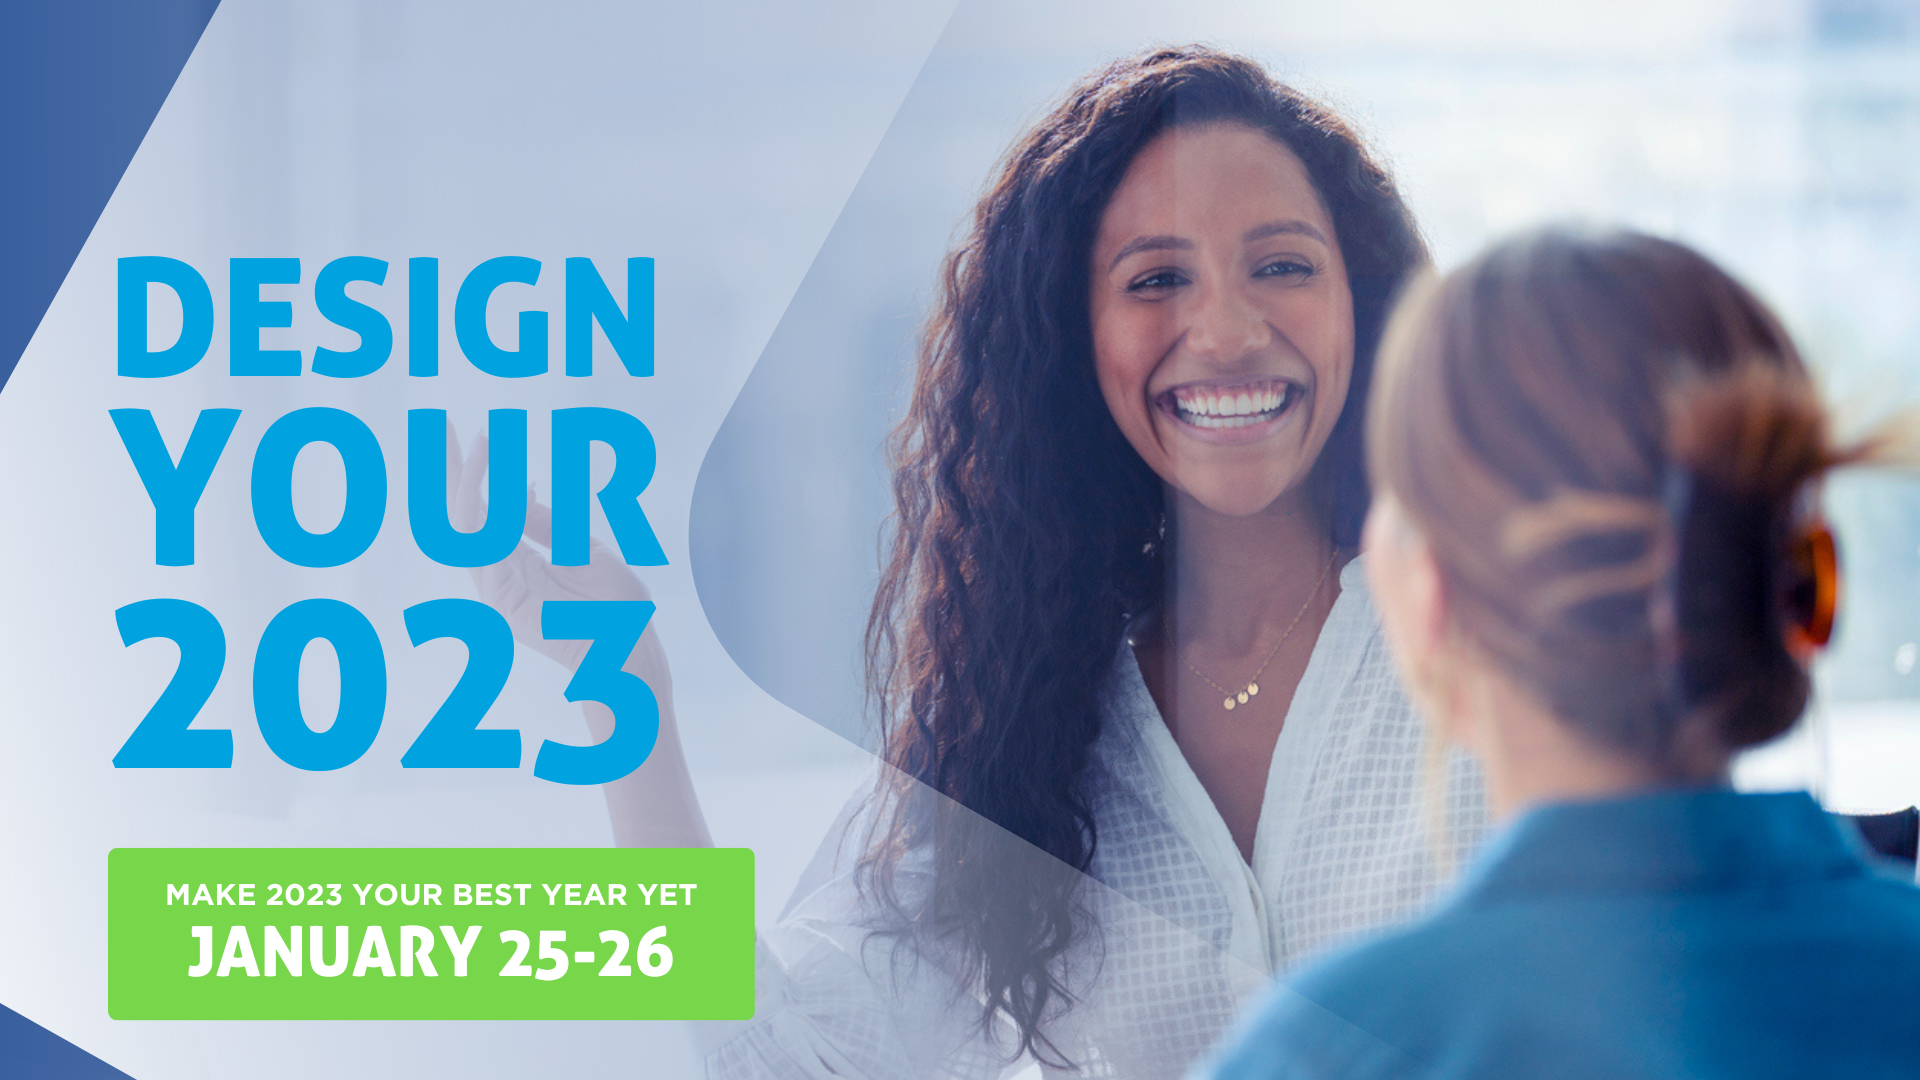 Updated LinkedIn Event Cover Design Your Year DY2023 